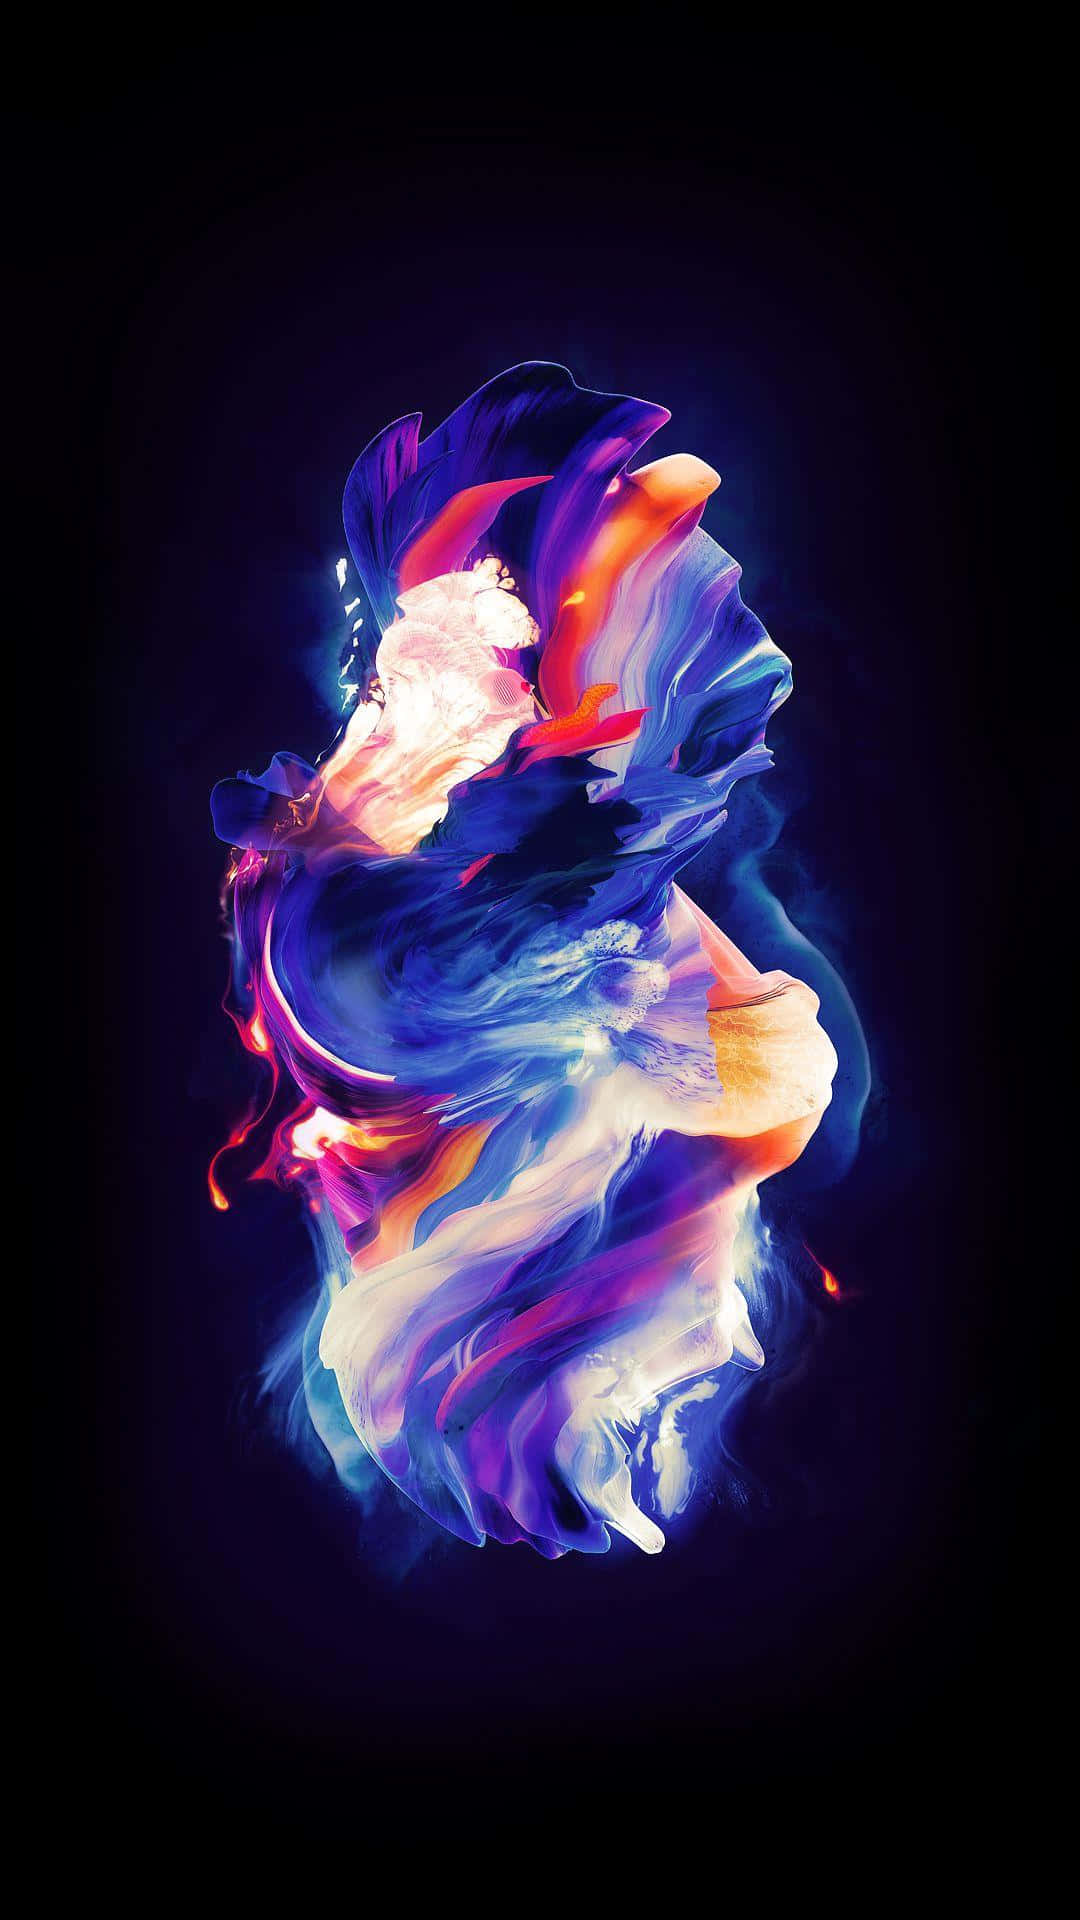 A Colorful Abstract Painting On A Black Background